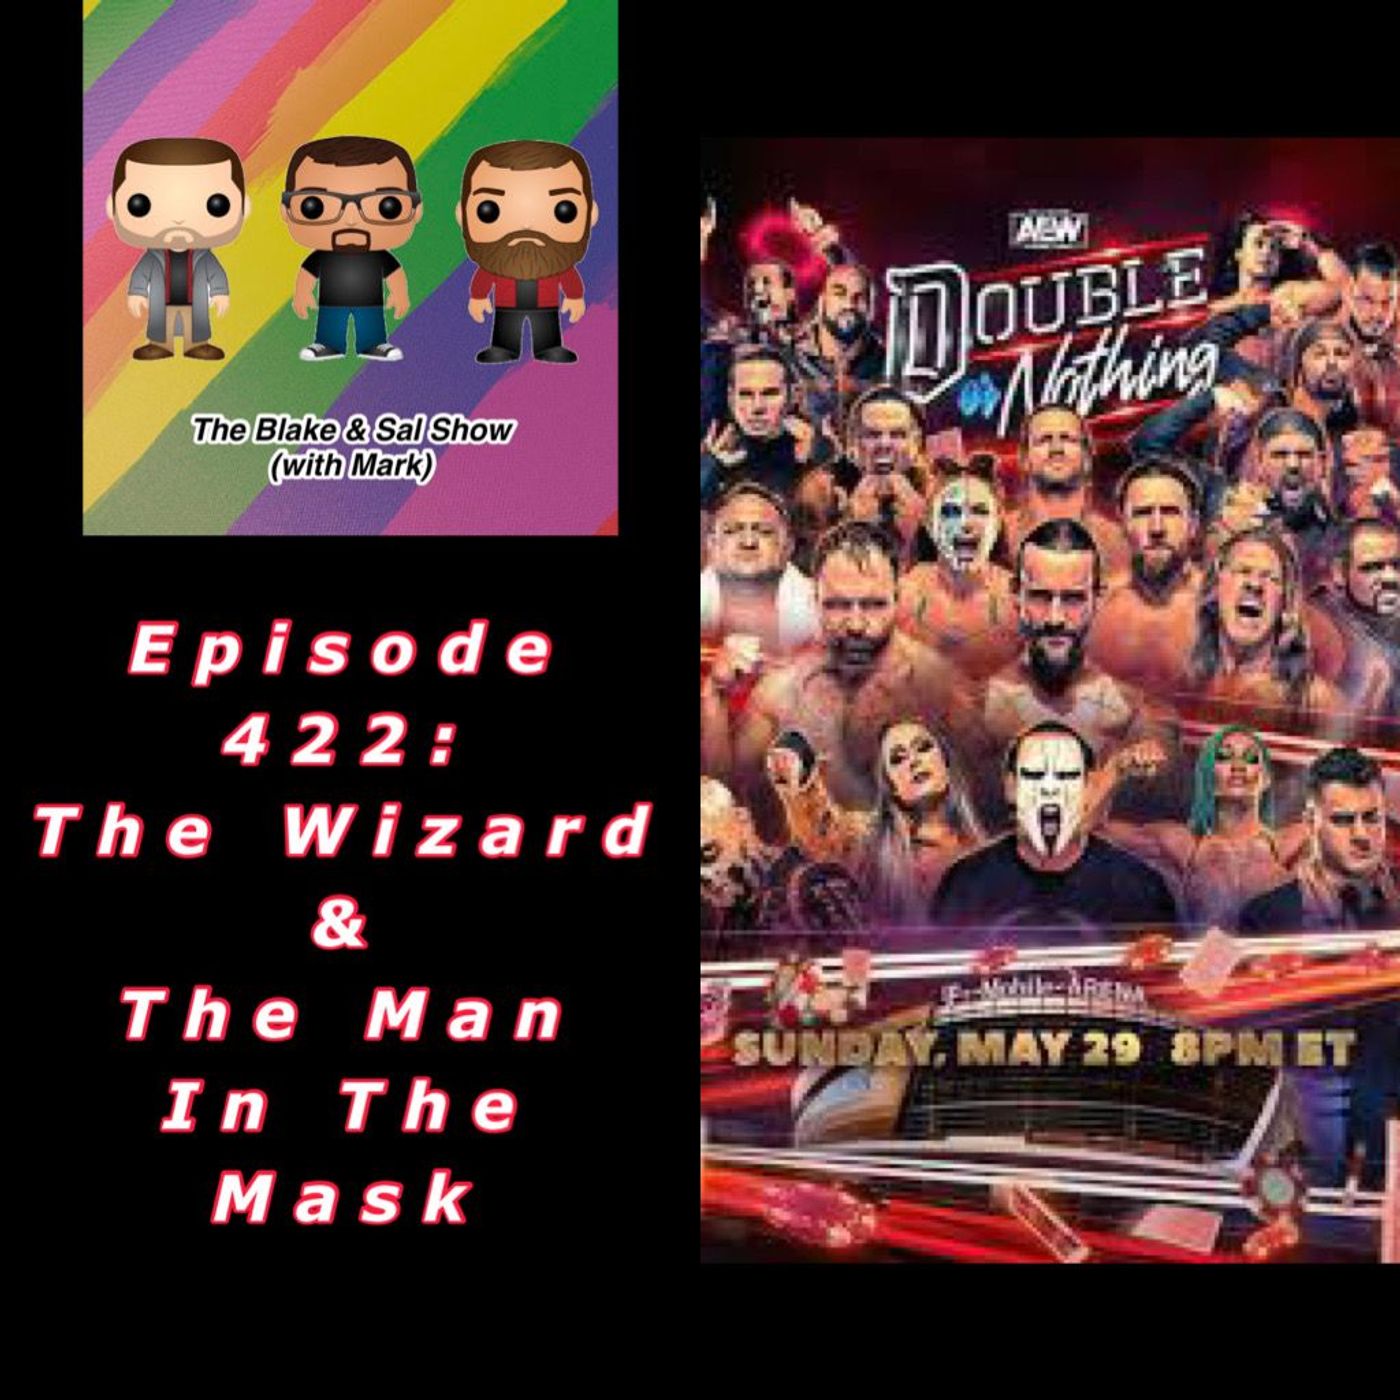 Episode 422: The Wizard & The Man In The Mask (Special Guest: Jon Parker)